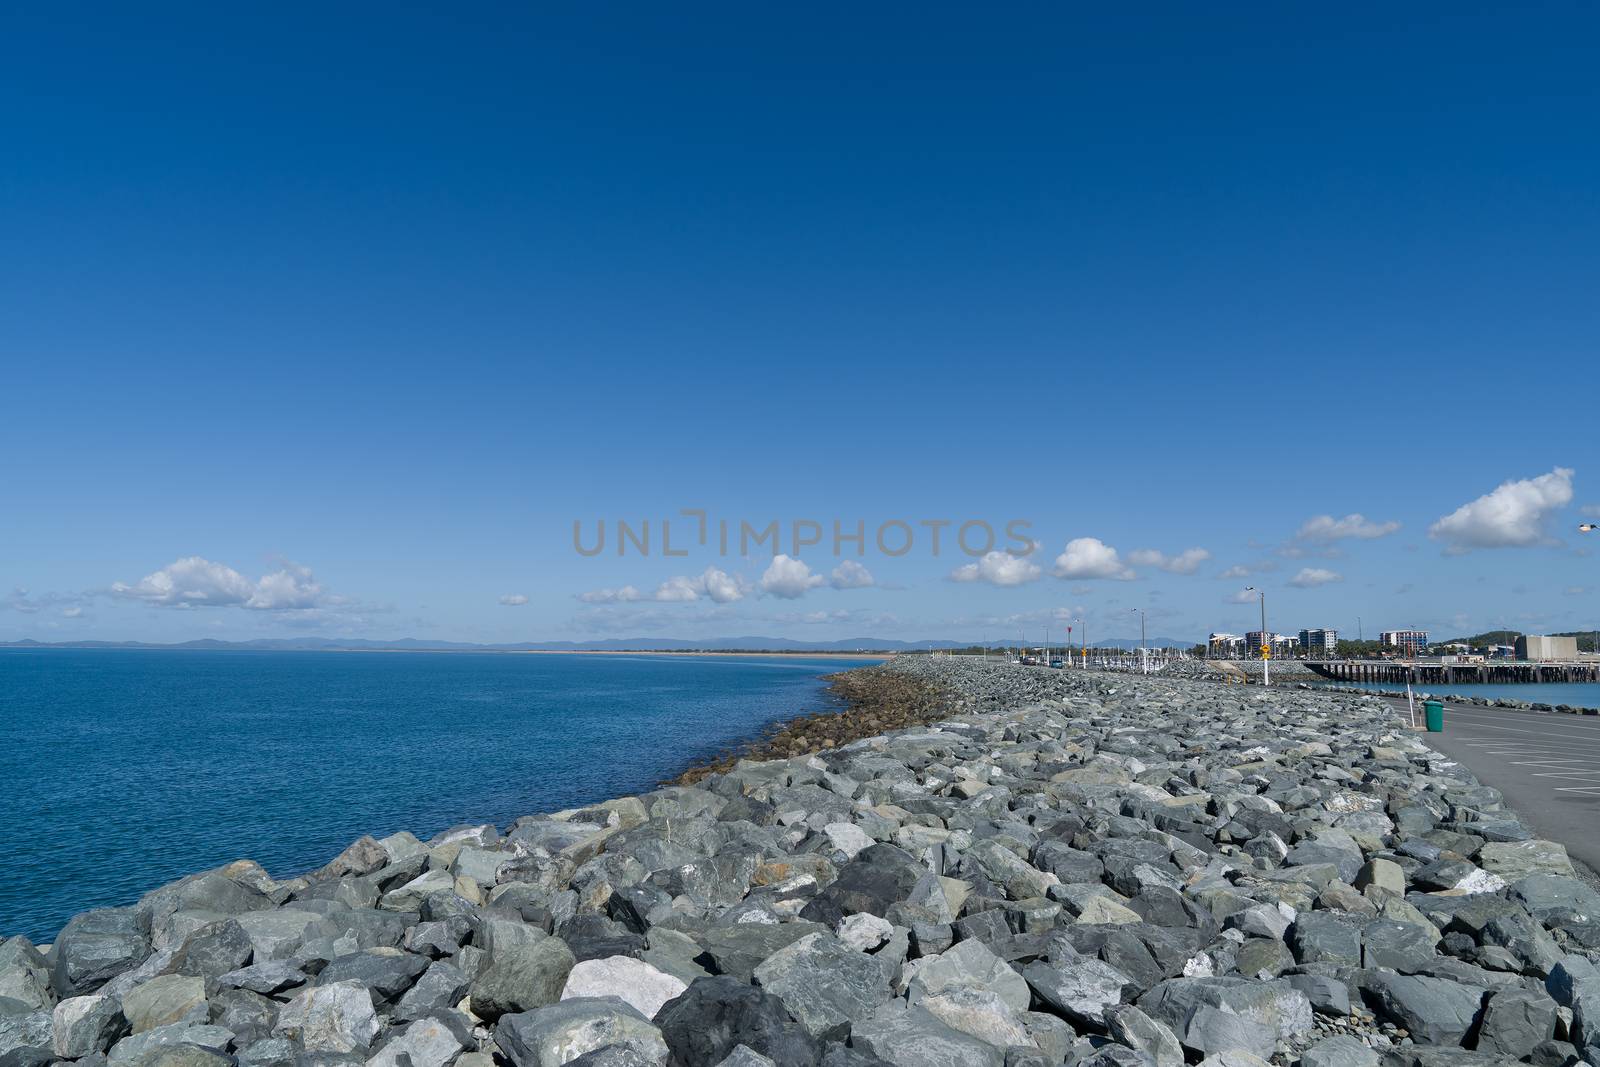 View from the rock wall of a marina breakwater out to the ocean and along the nearby beach, taking in some of the commercial and residential precinct behind